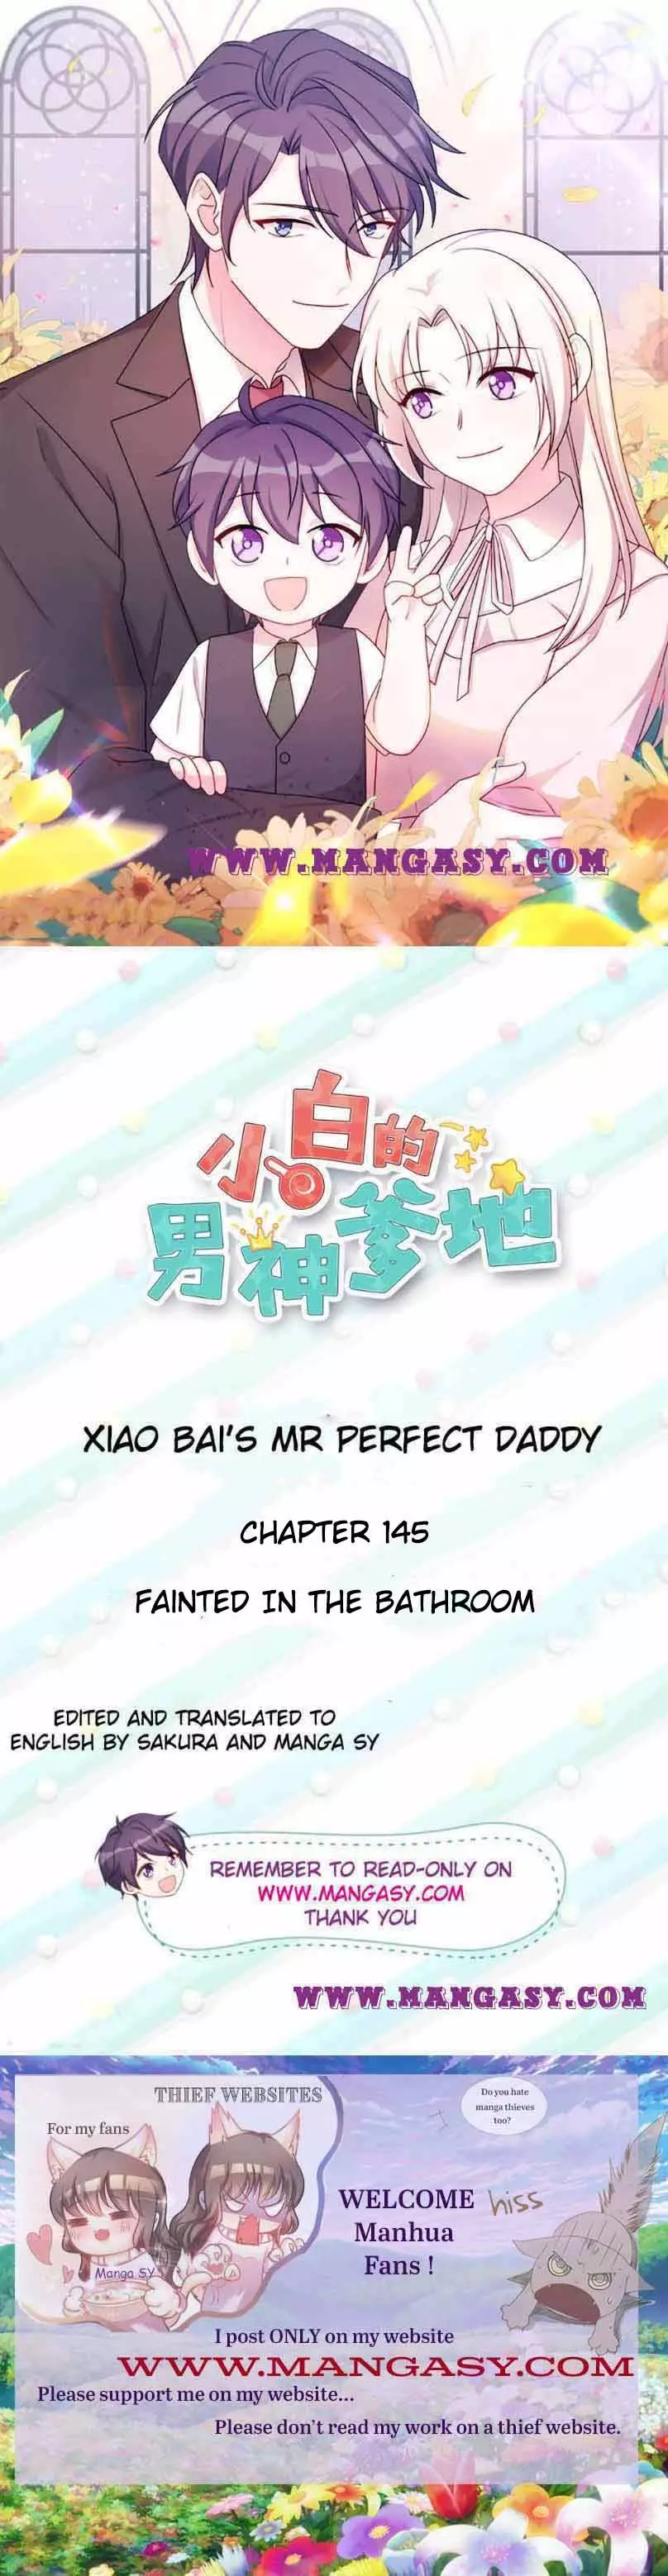 Xiao Bai’S Father Is A Wonderful Person - 145 page 1-d9f15f6d